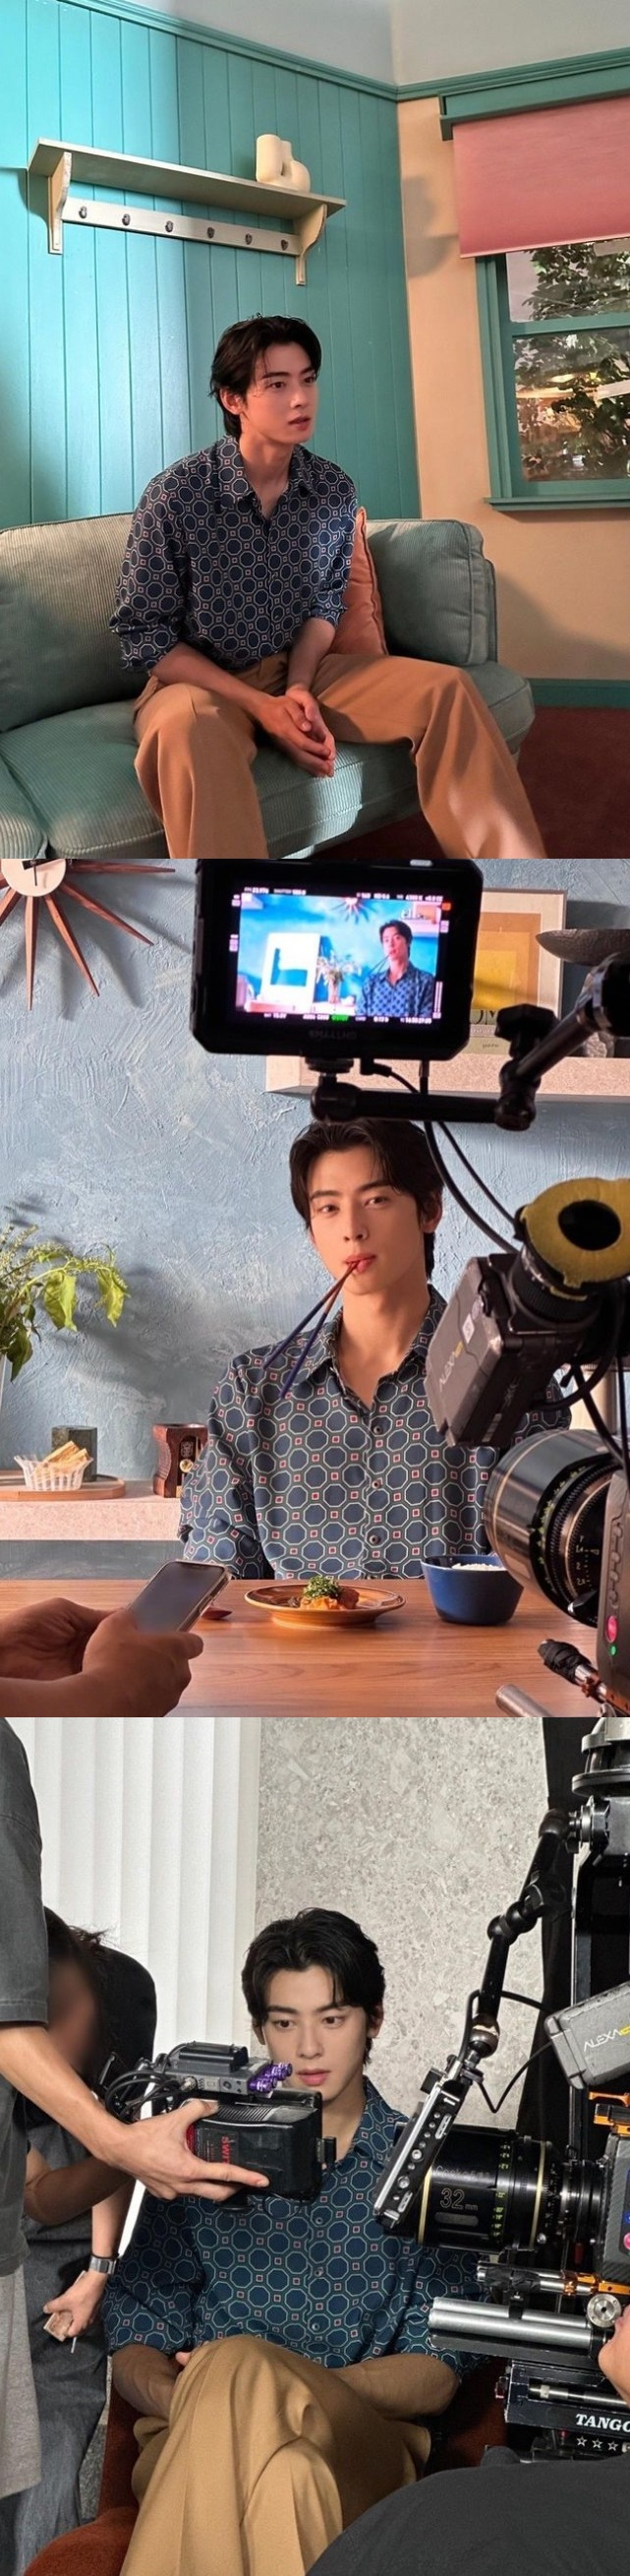 On the 9th, Cha Eun-woo posted several photos on his instagram with an article called Homings.In the released photo, Cha Eun-woo completed his casual look by matching a colorful blue shirt with beige pants, especially his open mouth and chopsticks in his mouth, which reminded fans of his boyfriends meme.The netizens responded Thank you very much for the fact that you exist, You are so handsome, You are very cute, It looks delicious with steamed Cha Eun-woo effect and What is the bloodline?Meanwhile, Cha Eun-woo has confirmed his appearance in the new drama The Soul-Mate World, which will air in the first half of next year.The Soul-Mate World is an emotional healing thriller that takes place when a psychology professor and famous writer Eun Soo-hyun, who has lost his young son unfairly, disposes of the perpetrators who are out of the law.